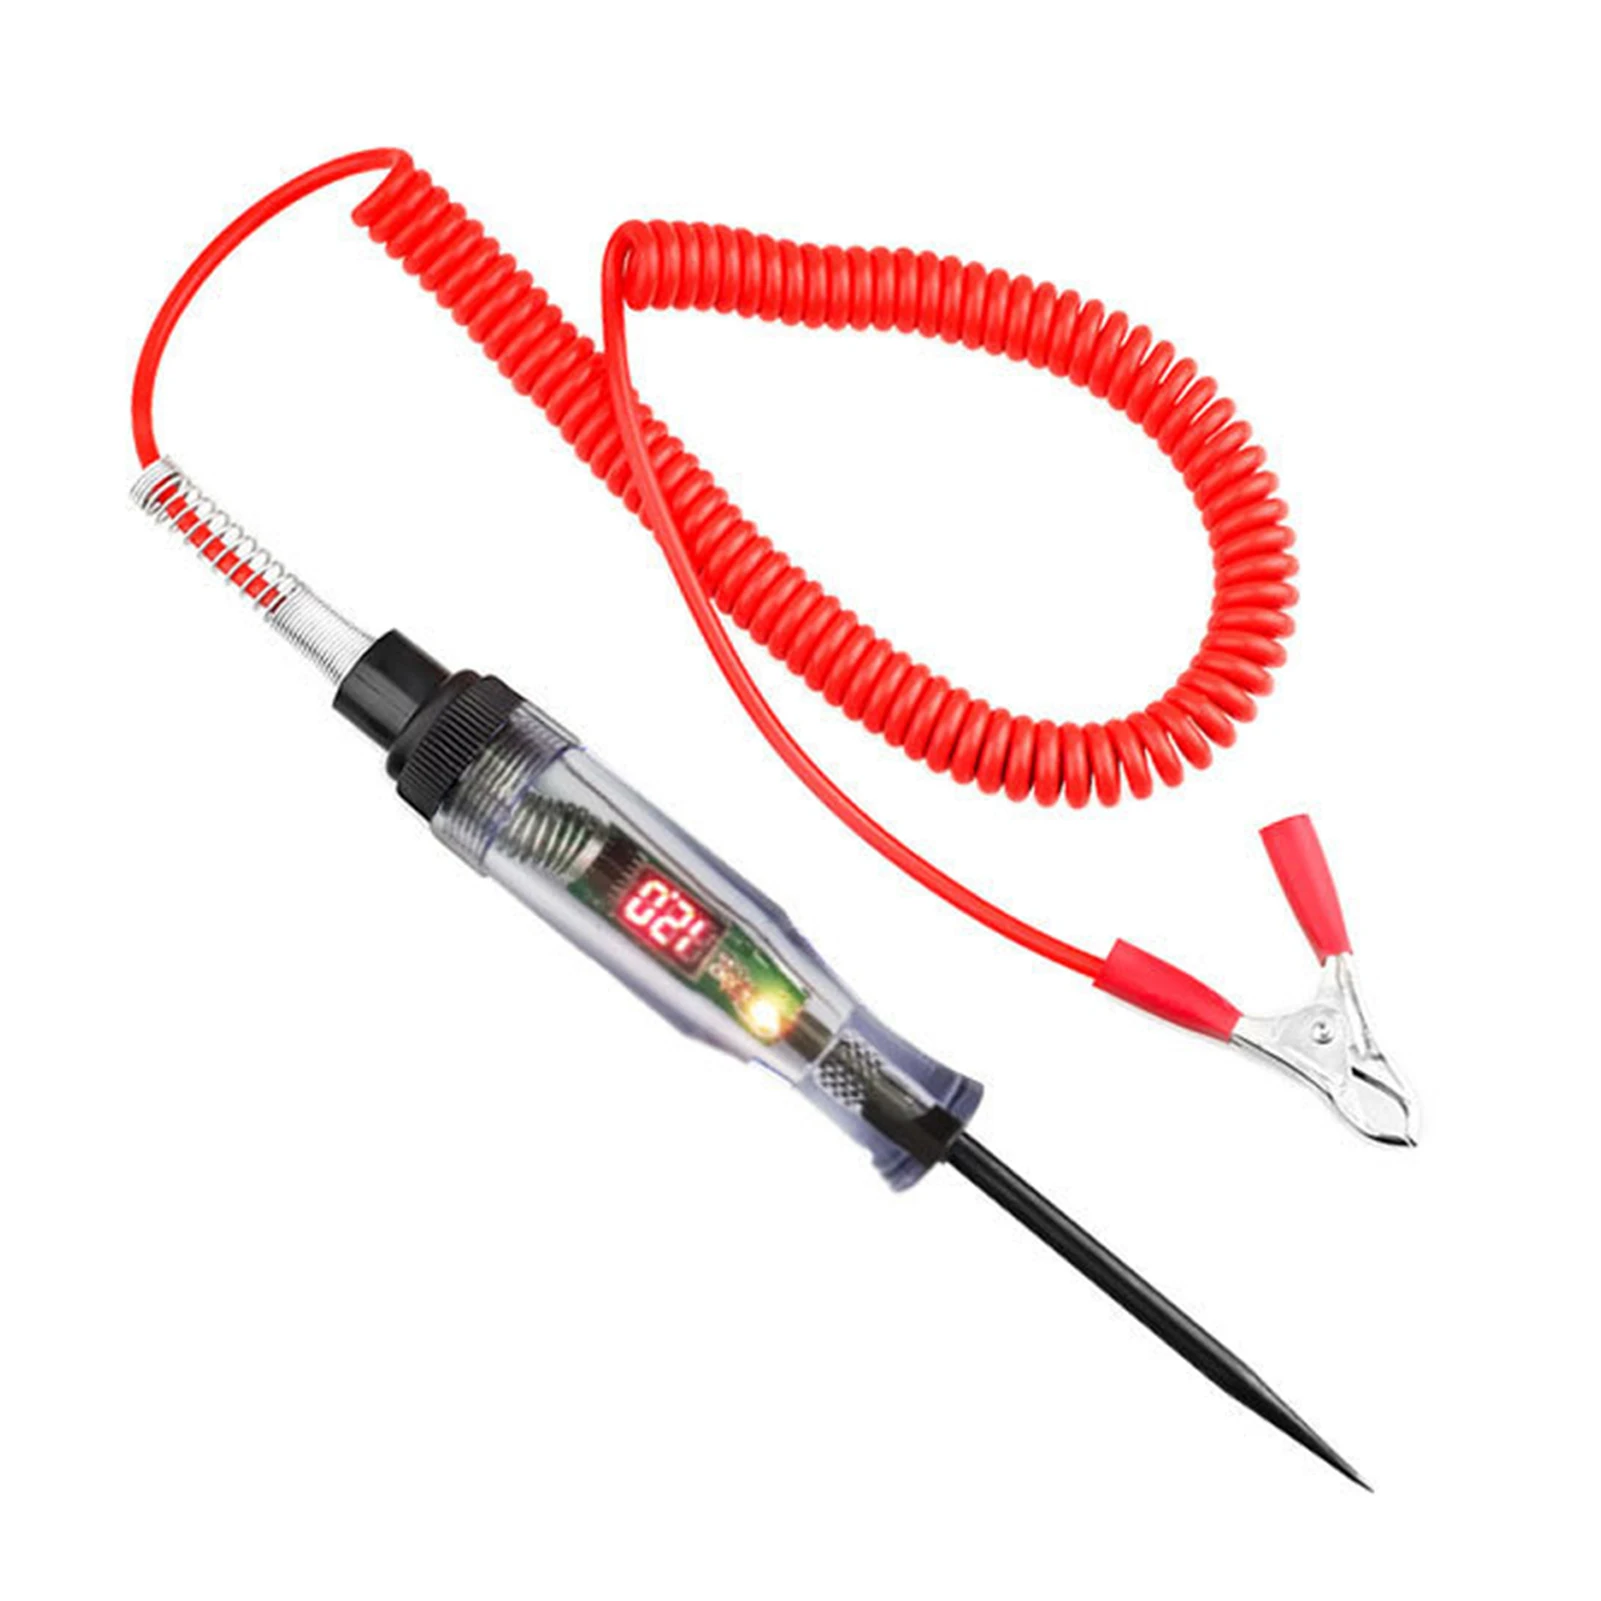 

3V To 70V Automotive Circuit Tester Auto Voltage Detector Pen With Digital Display Fuse Tester For Car/Vehicles Professional Car